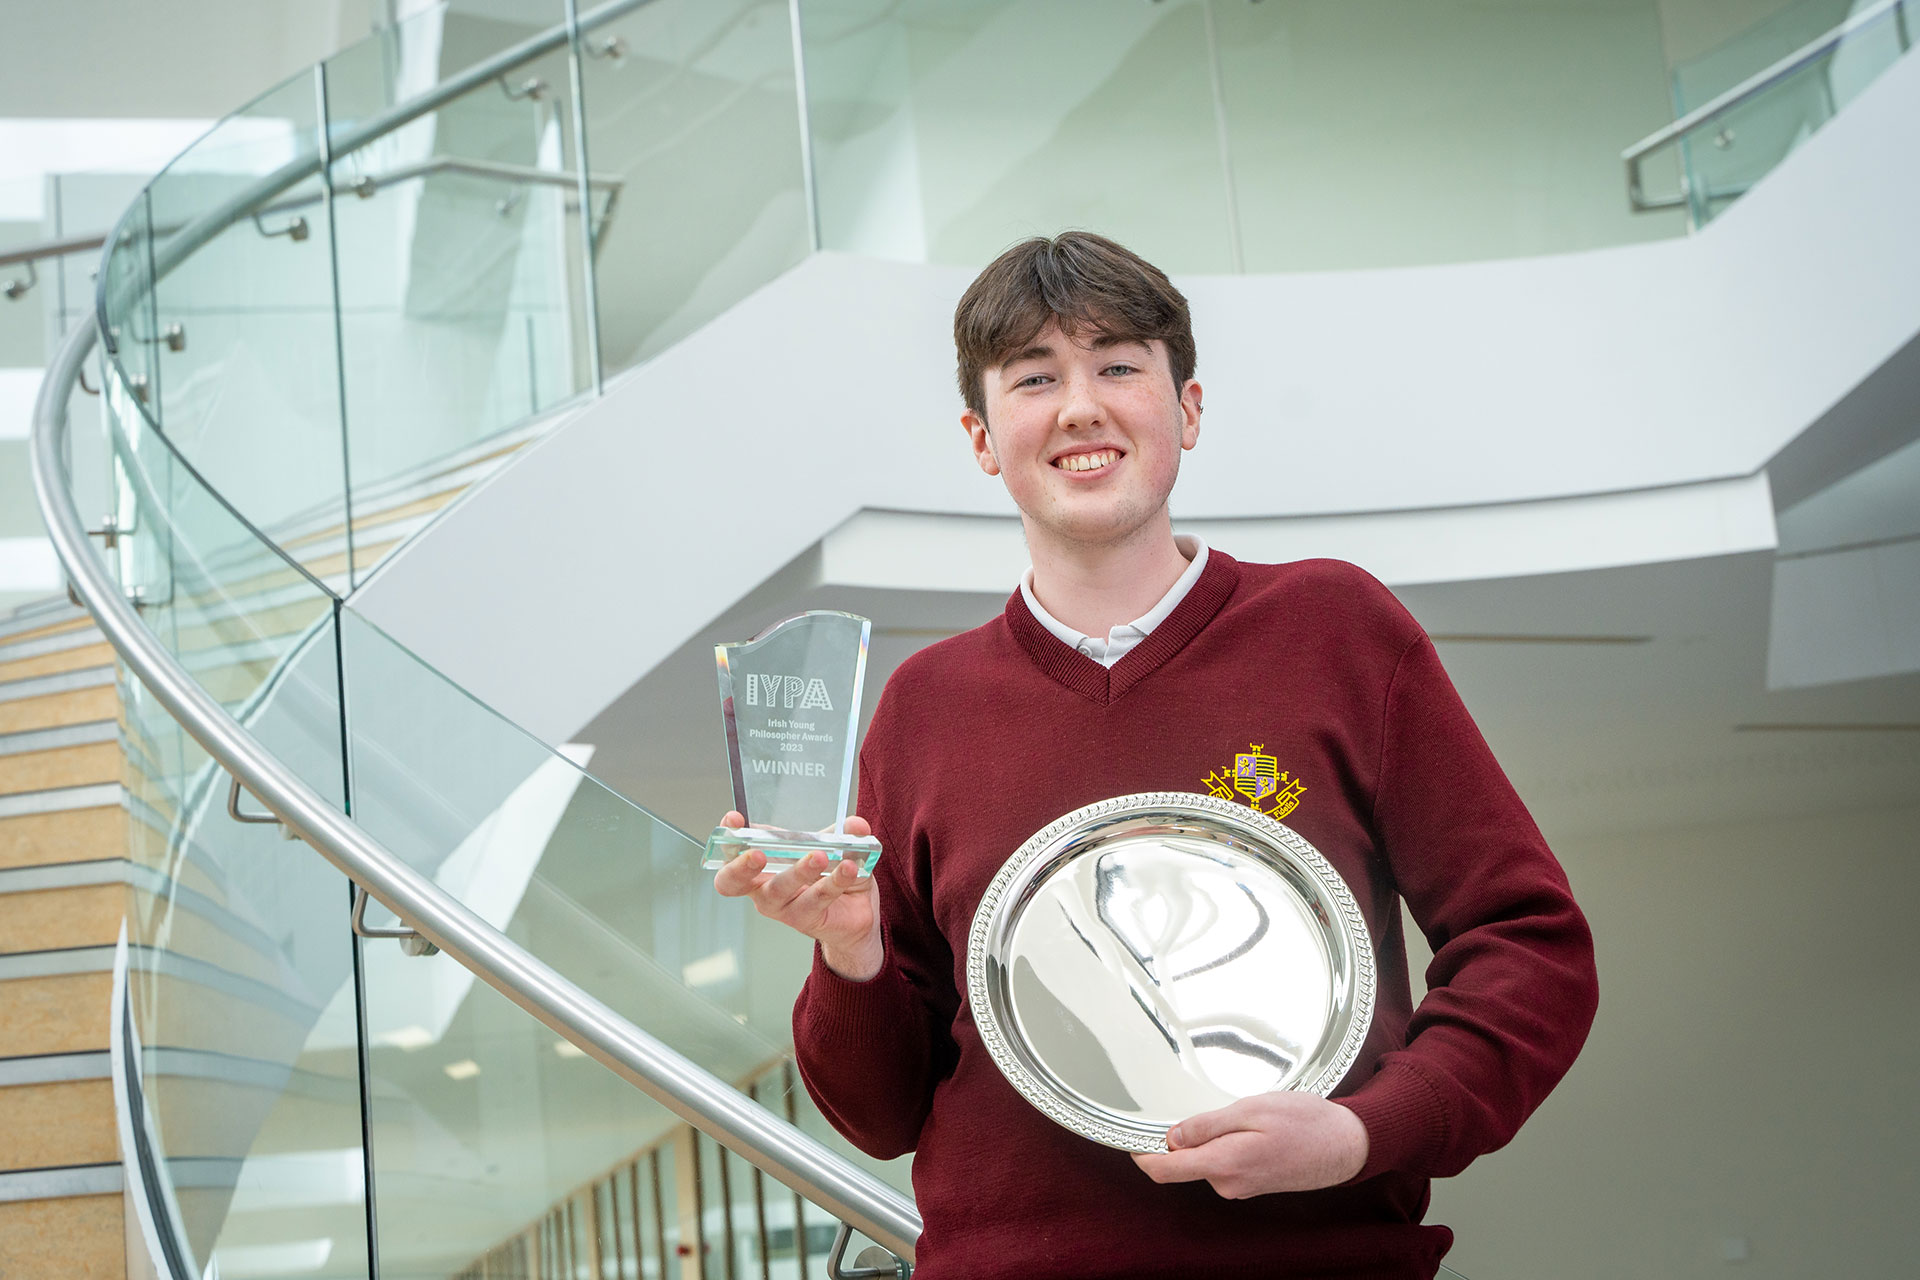 Seán Radcliffe - Grand Prize Winner of the 2023 Irish Young Philosopher Awards